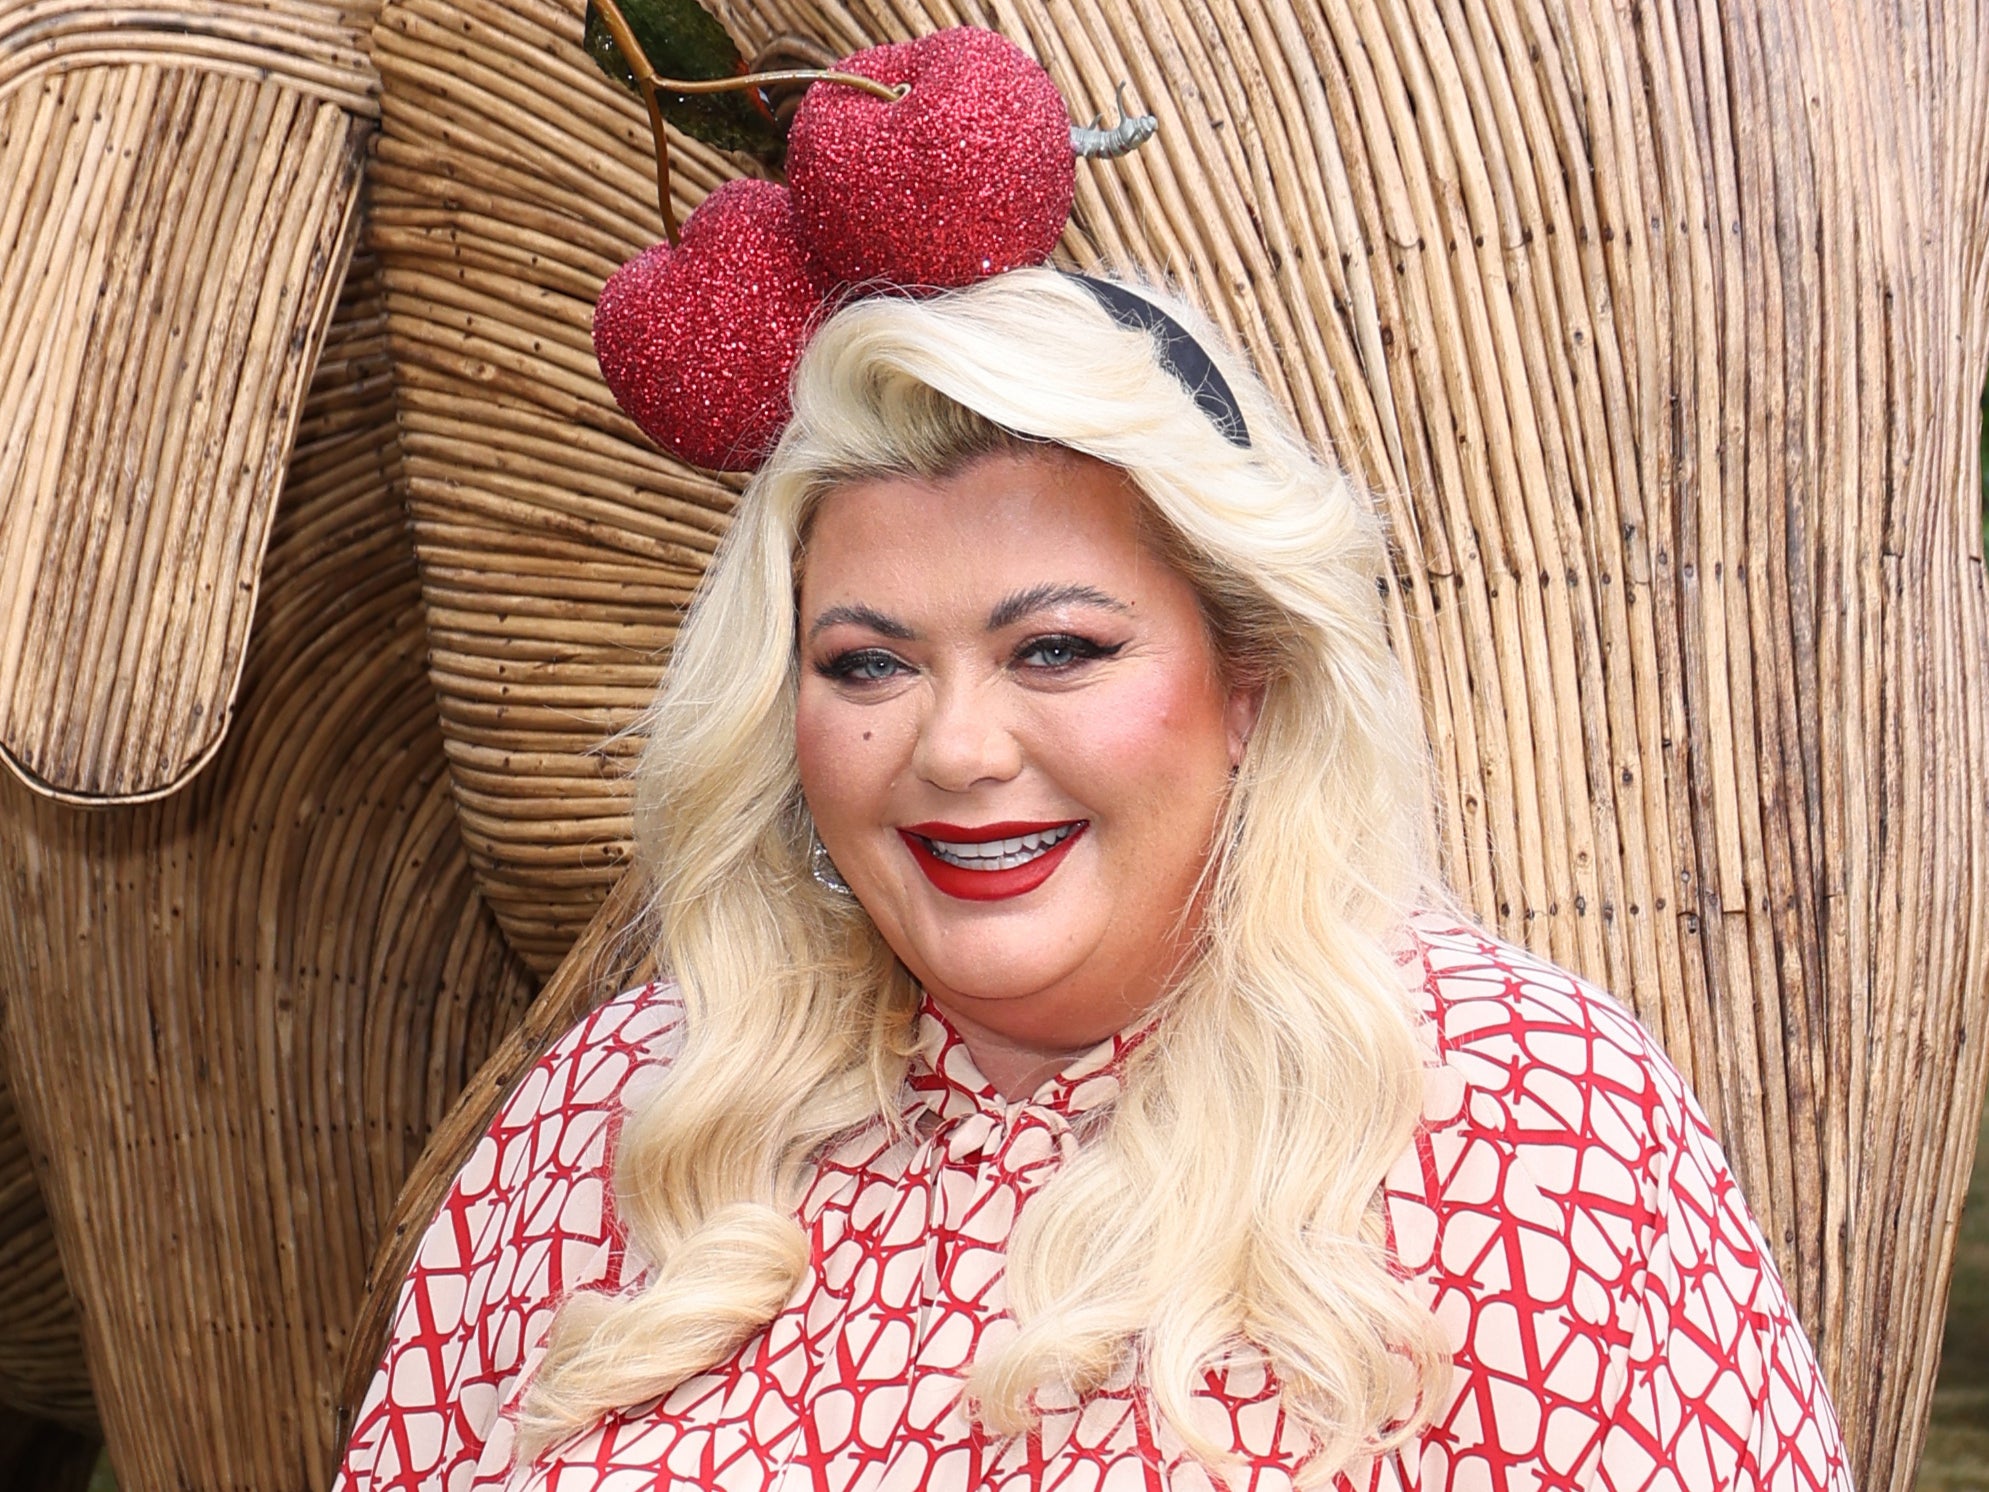 Gemma Collins has opened up about being asked to terminate a pregnancy by doctors